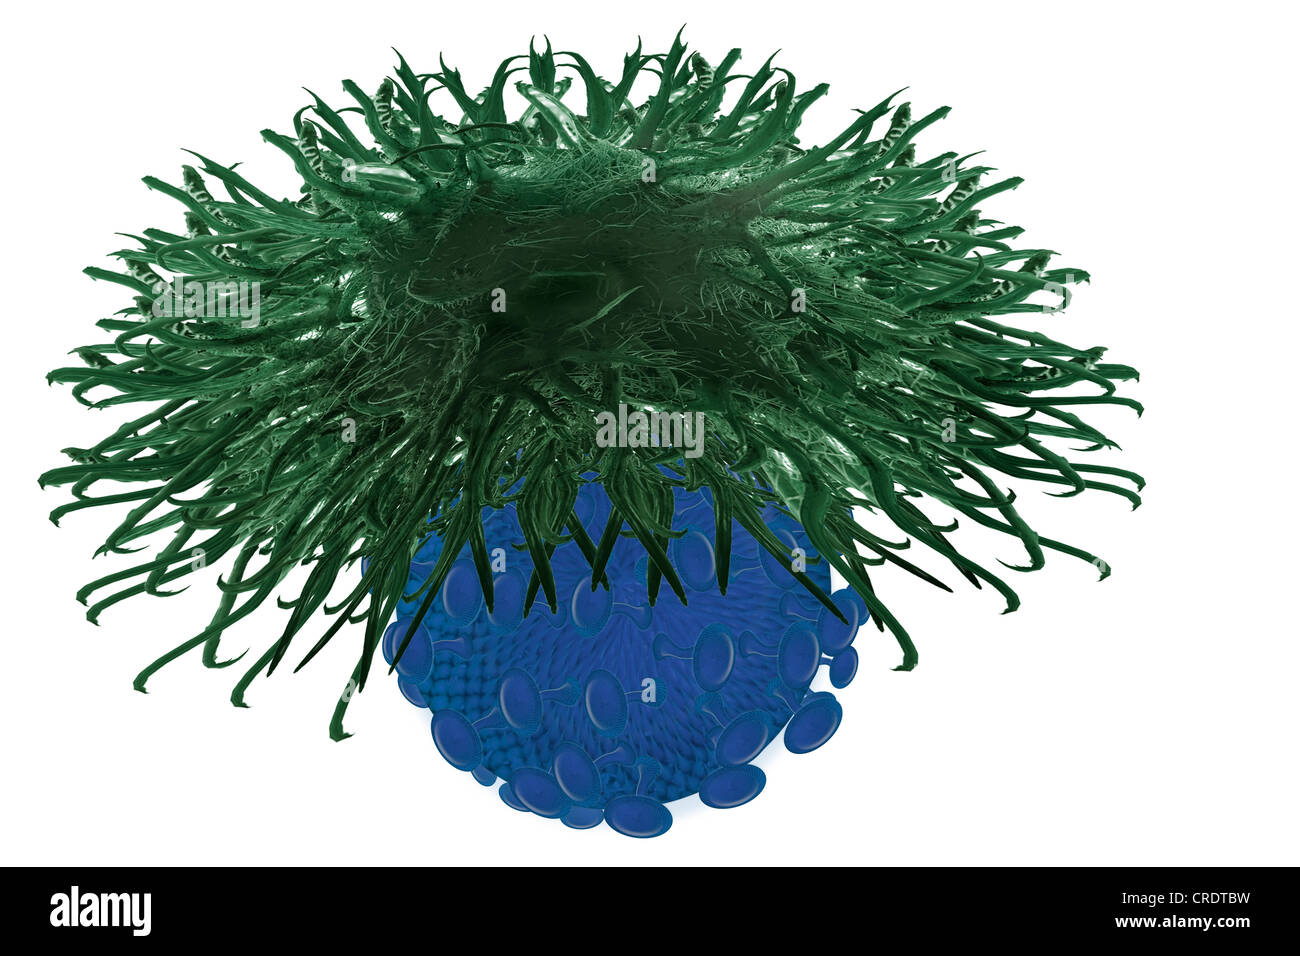 Dendritic cell of the immune system detecting a virus, illustration Stock Photo